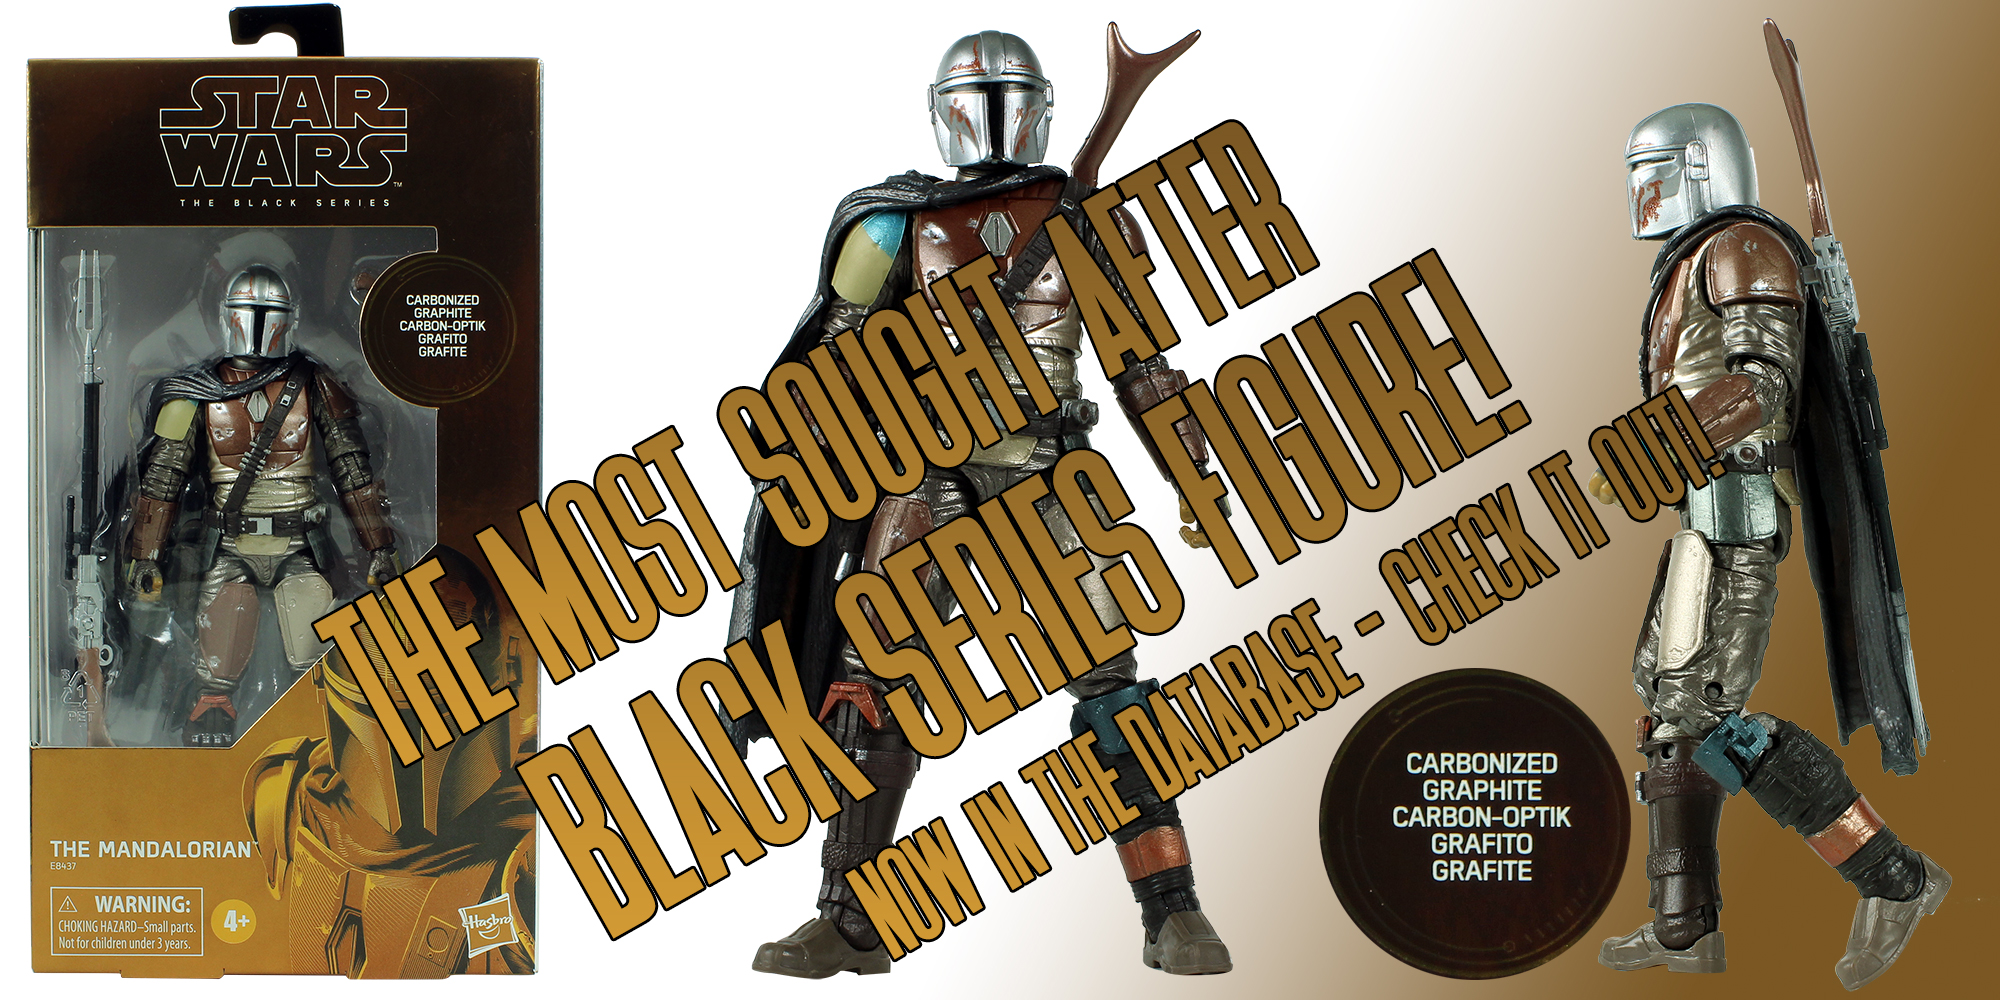 Check Out The CARBONIZED MANDALORIAN!